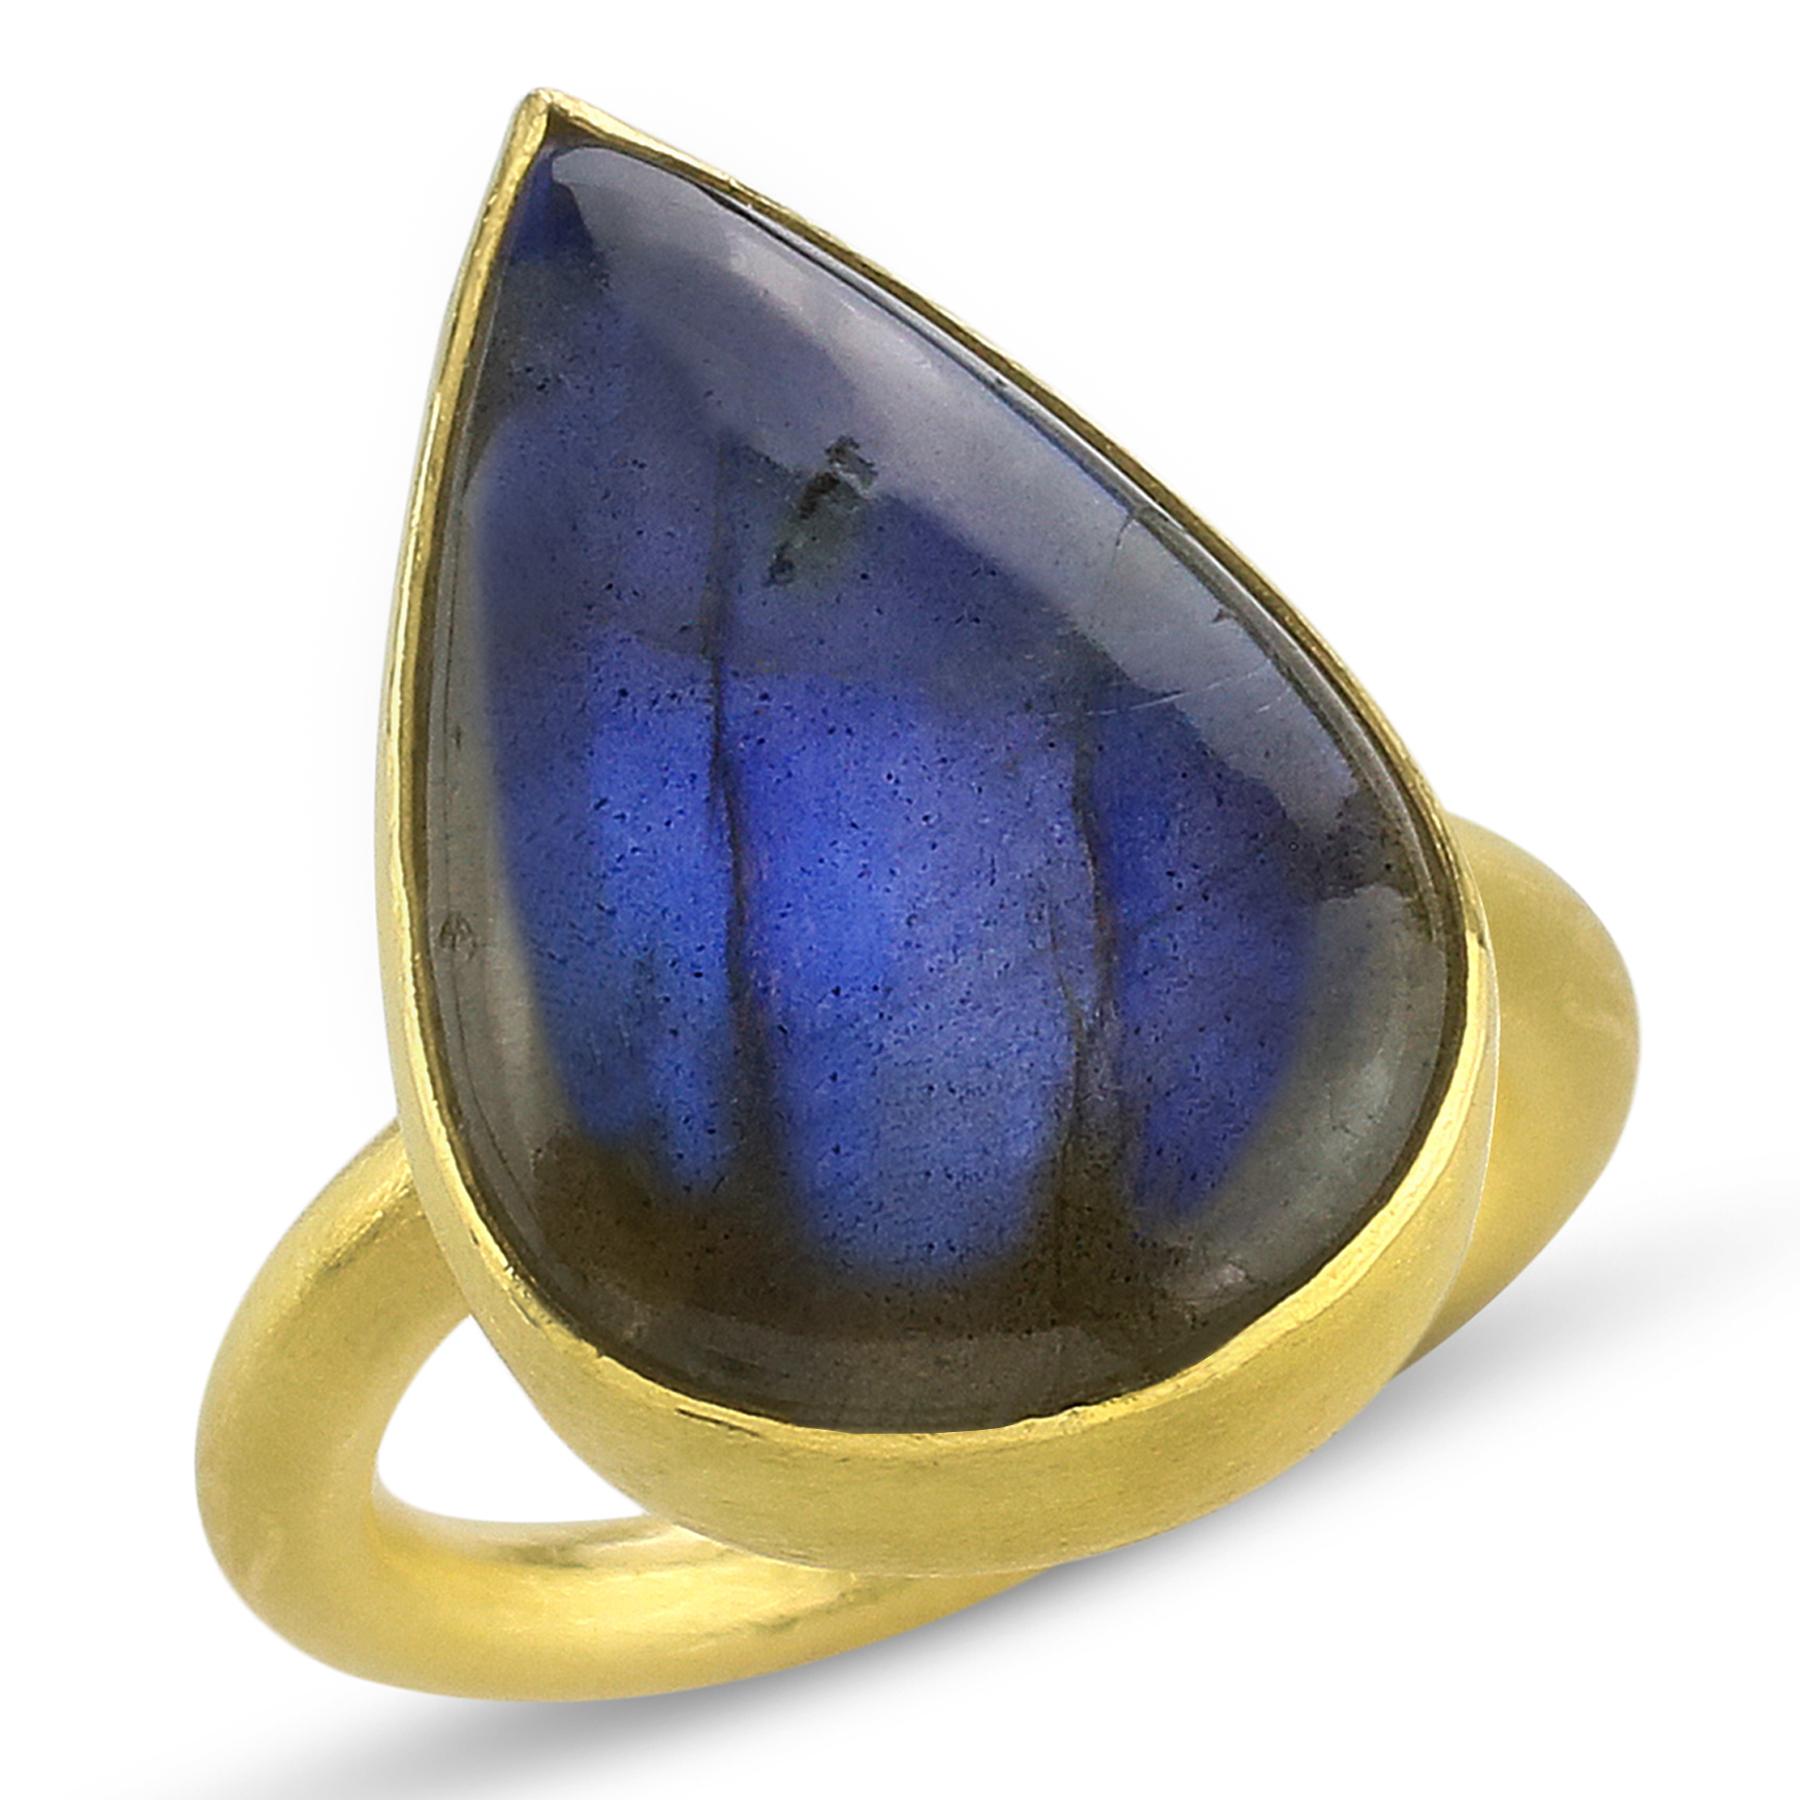 Artisan PHILIPPE SPENCER 20.87 Ct. Labradorite in 22K and 20K Gold Statement Ring For Sale